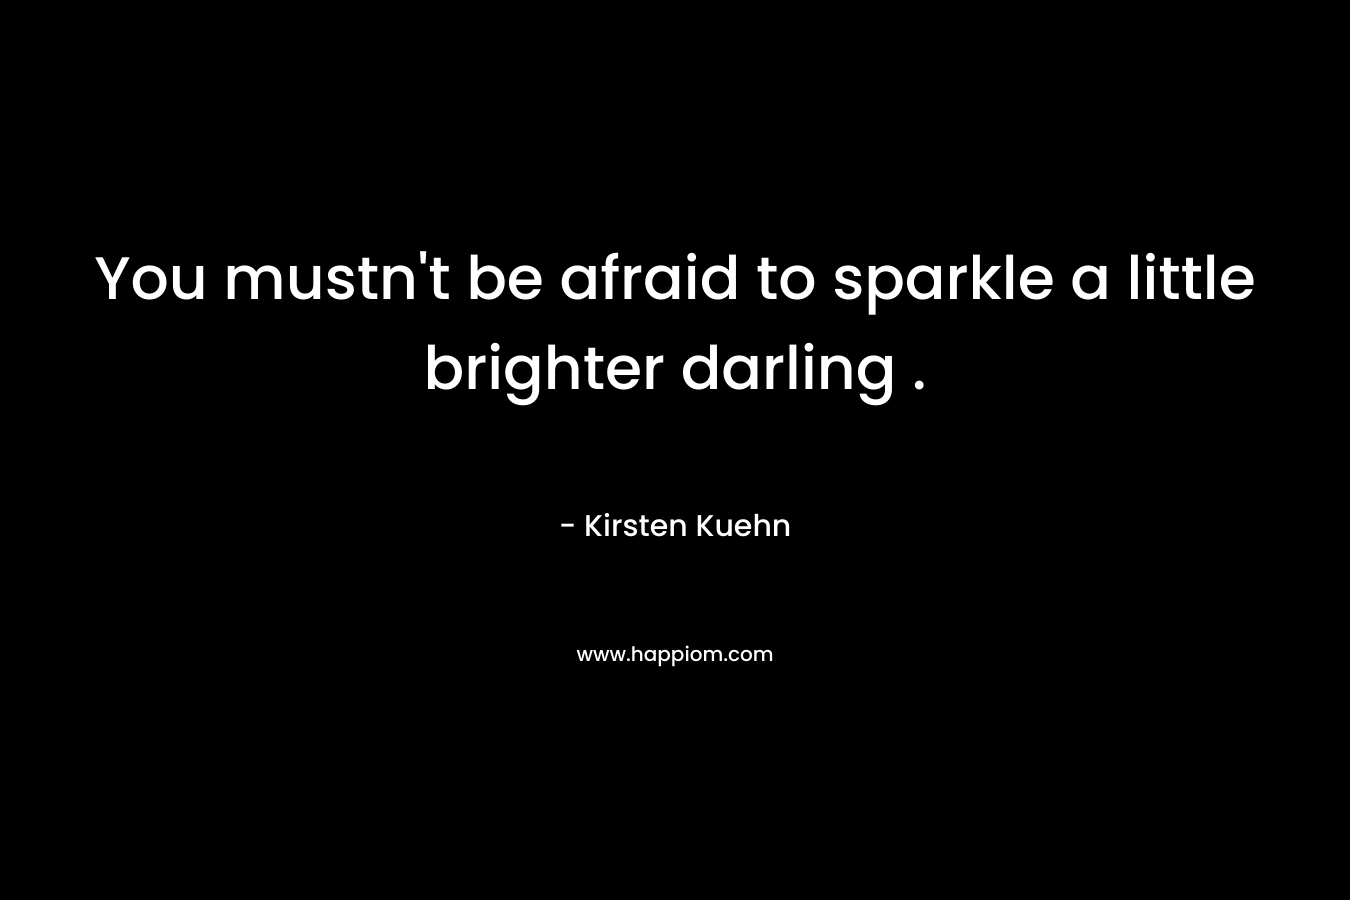 You mustn't be afraid to sparkle a little brighter darling .